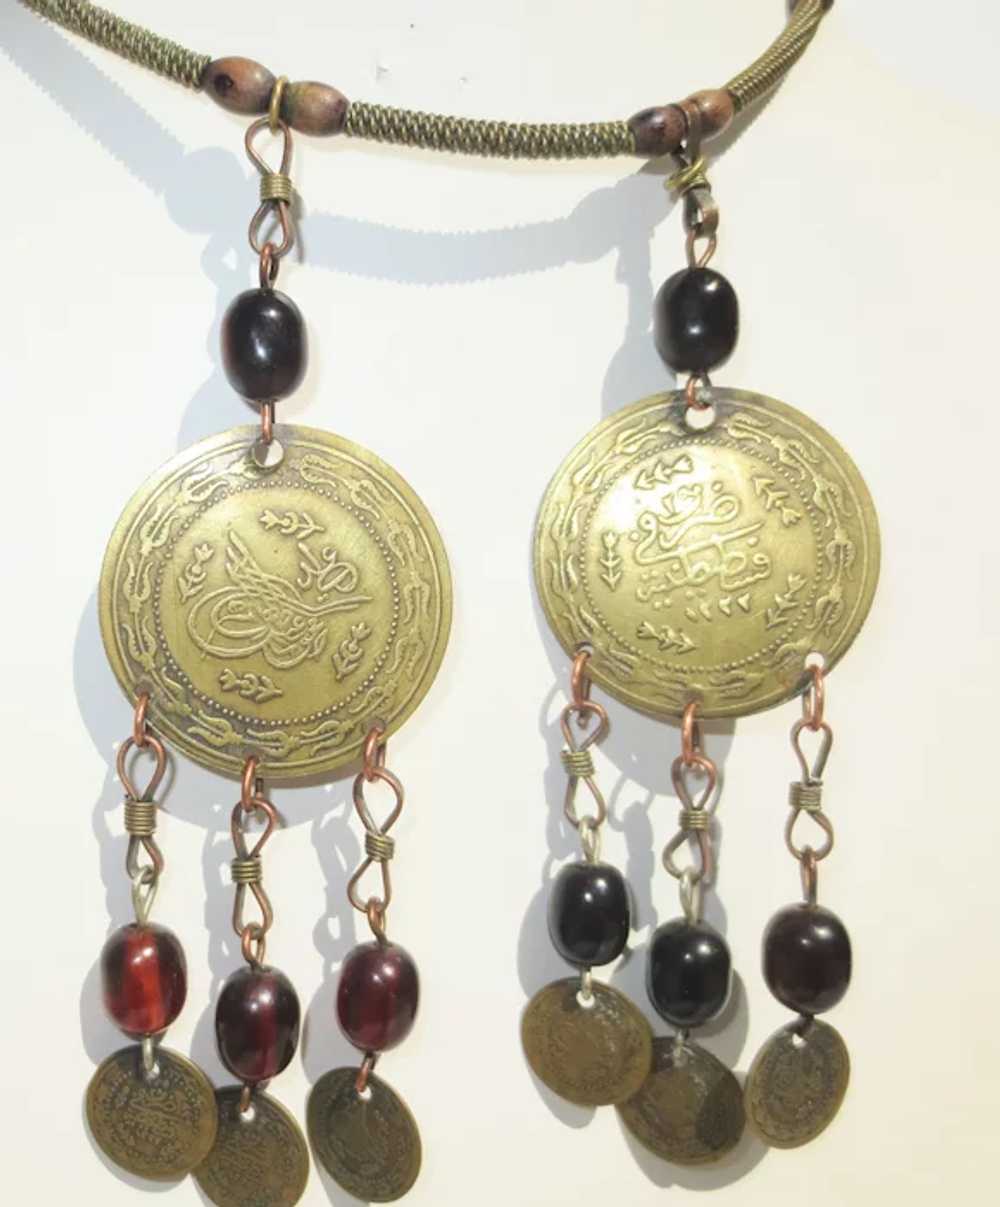 Yemenite Tribal Necklace with Coins - image 3